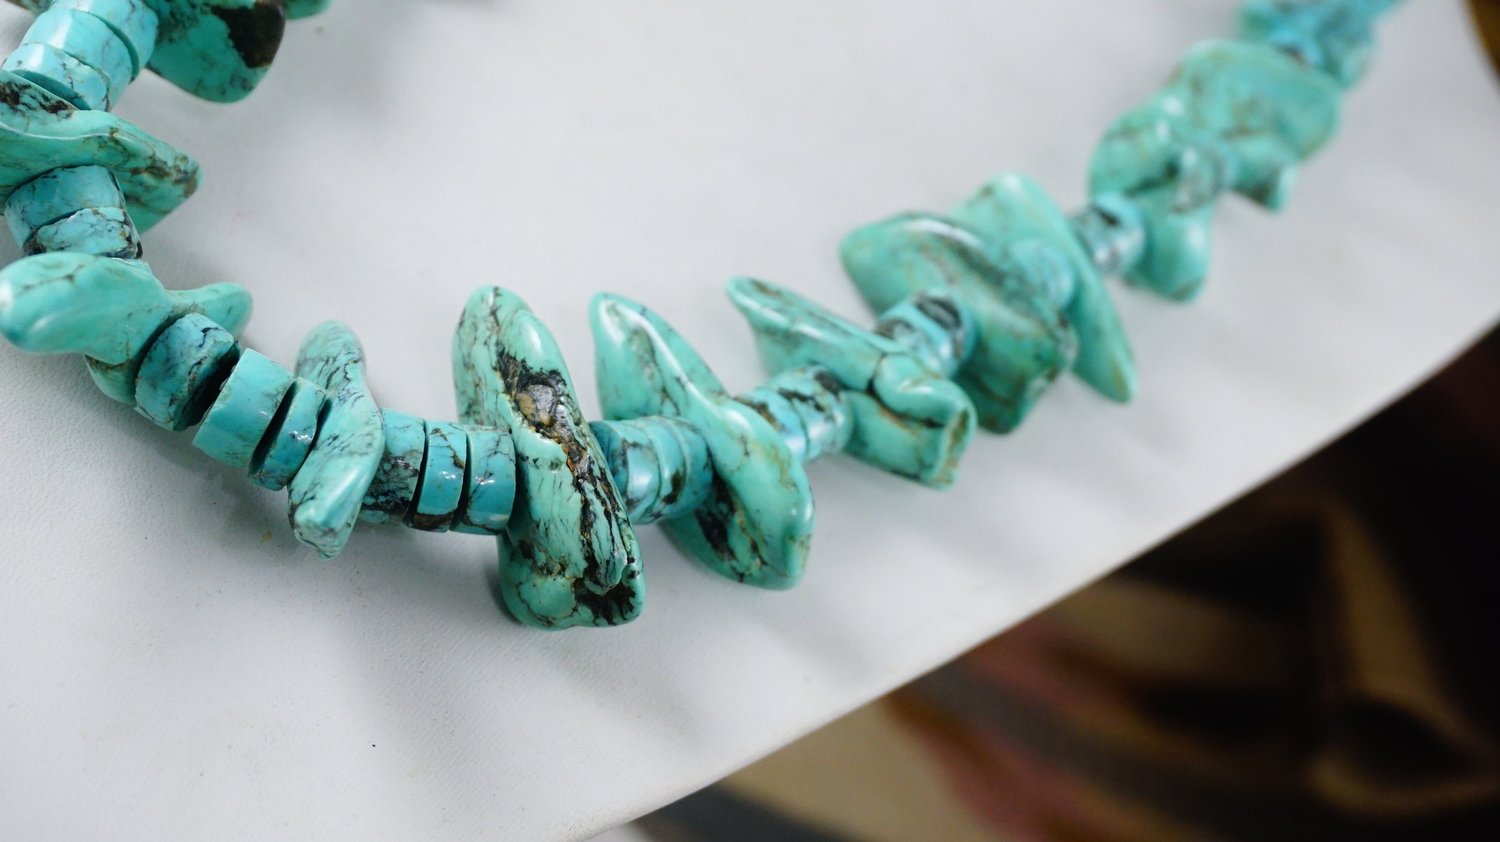 Turquoise Necklace Pen Shell Mother of Pearl Heishi Beads 